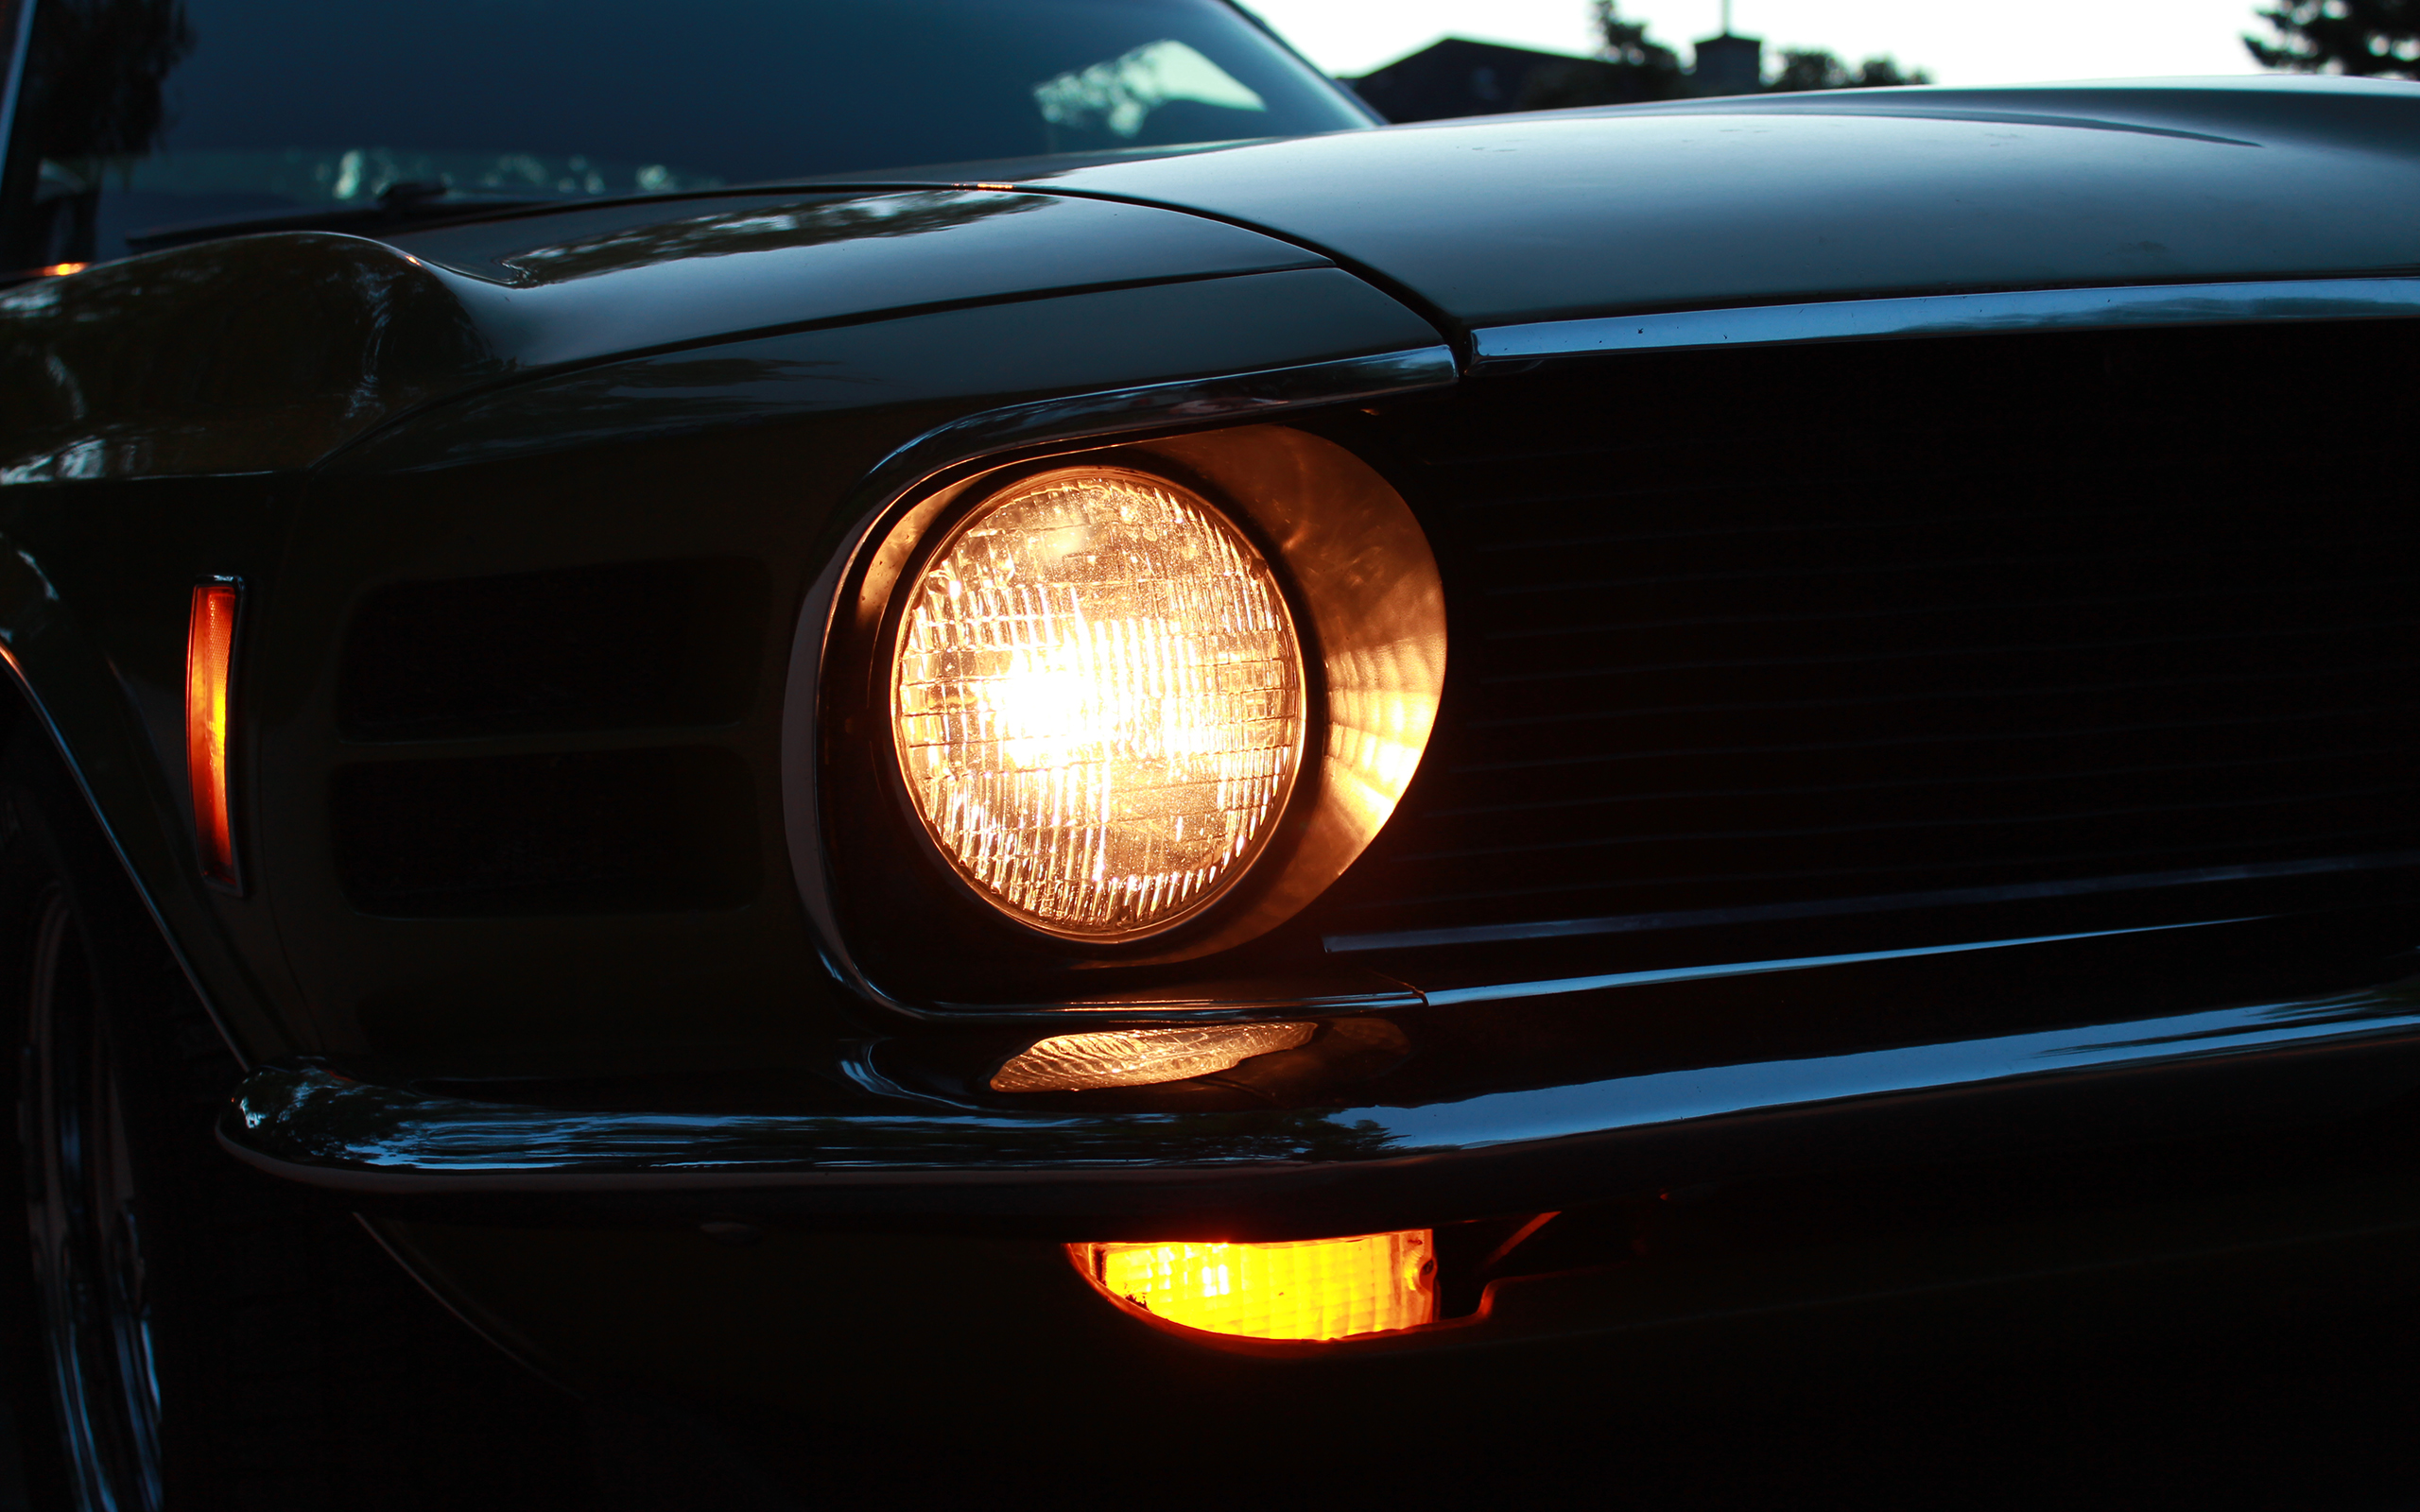 ford, Mustang, Classic, Car, Classic, Headlight, Muscle, Cars Wallpaper